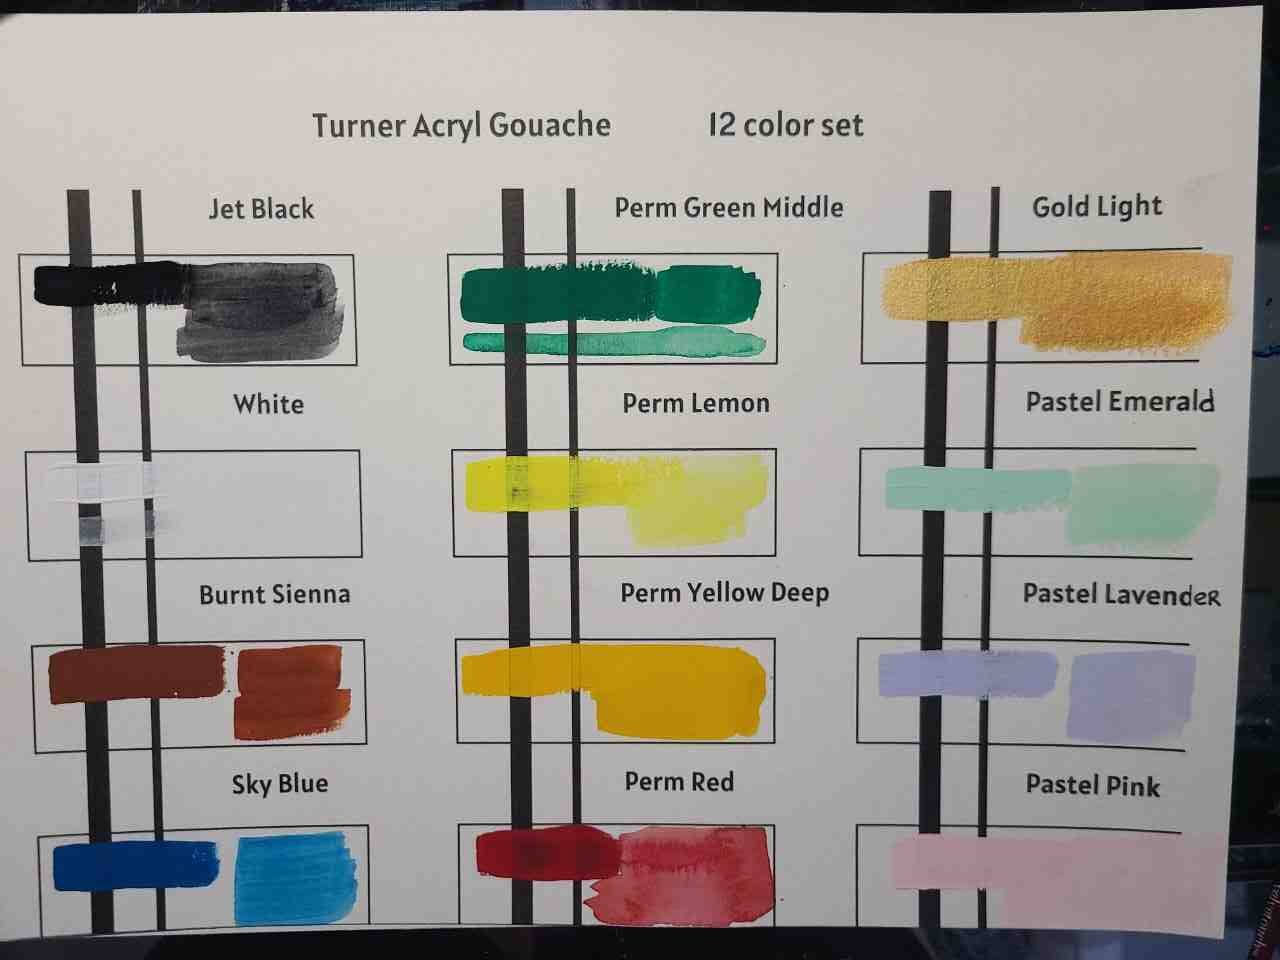 Turner Acryl Gouache Review color swatches